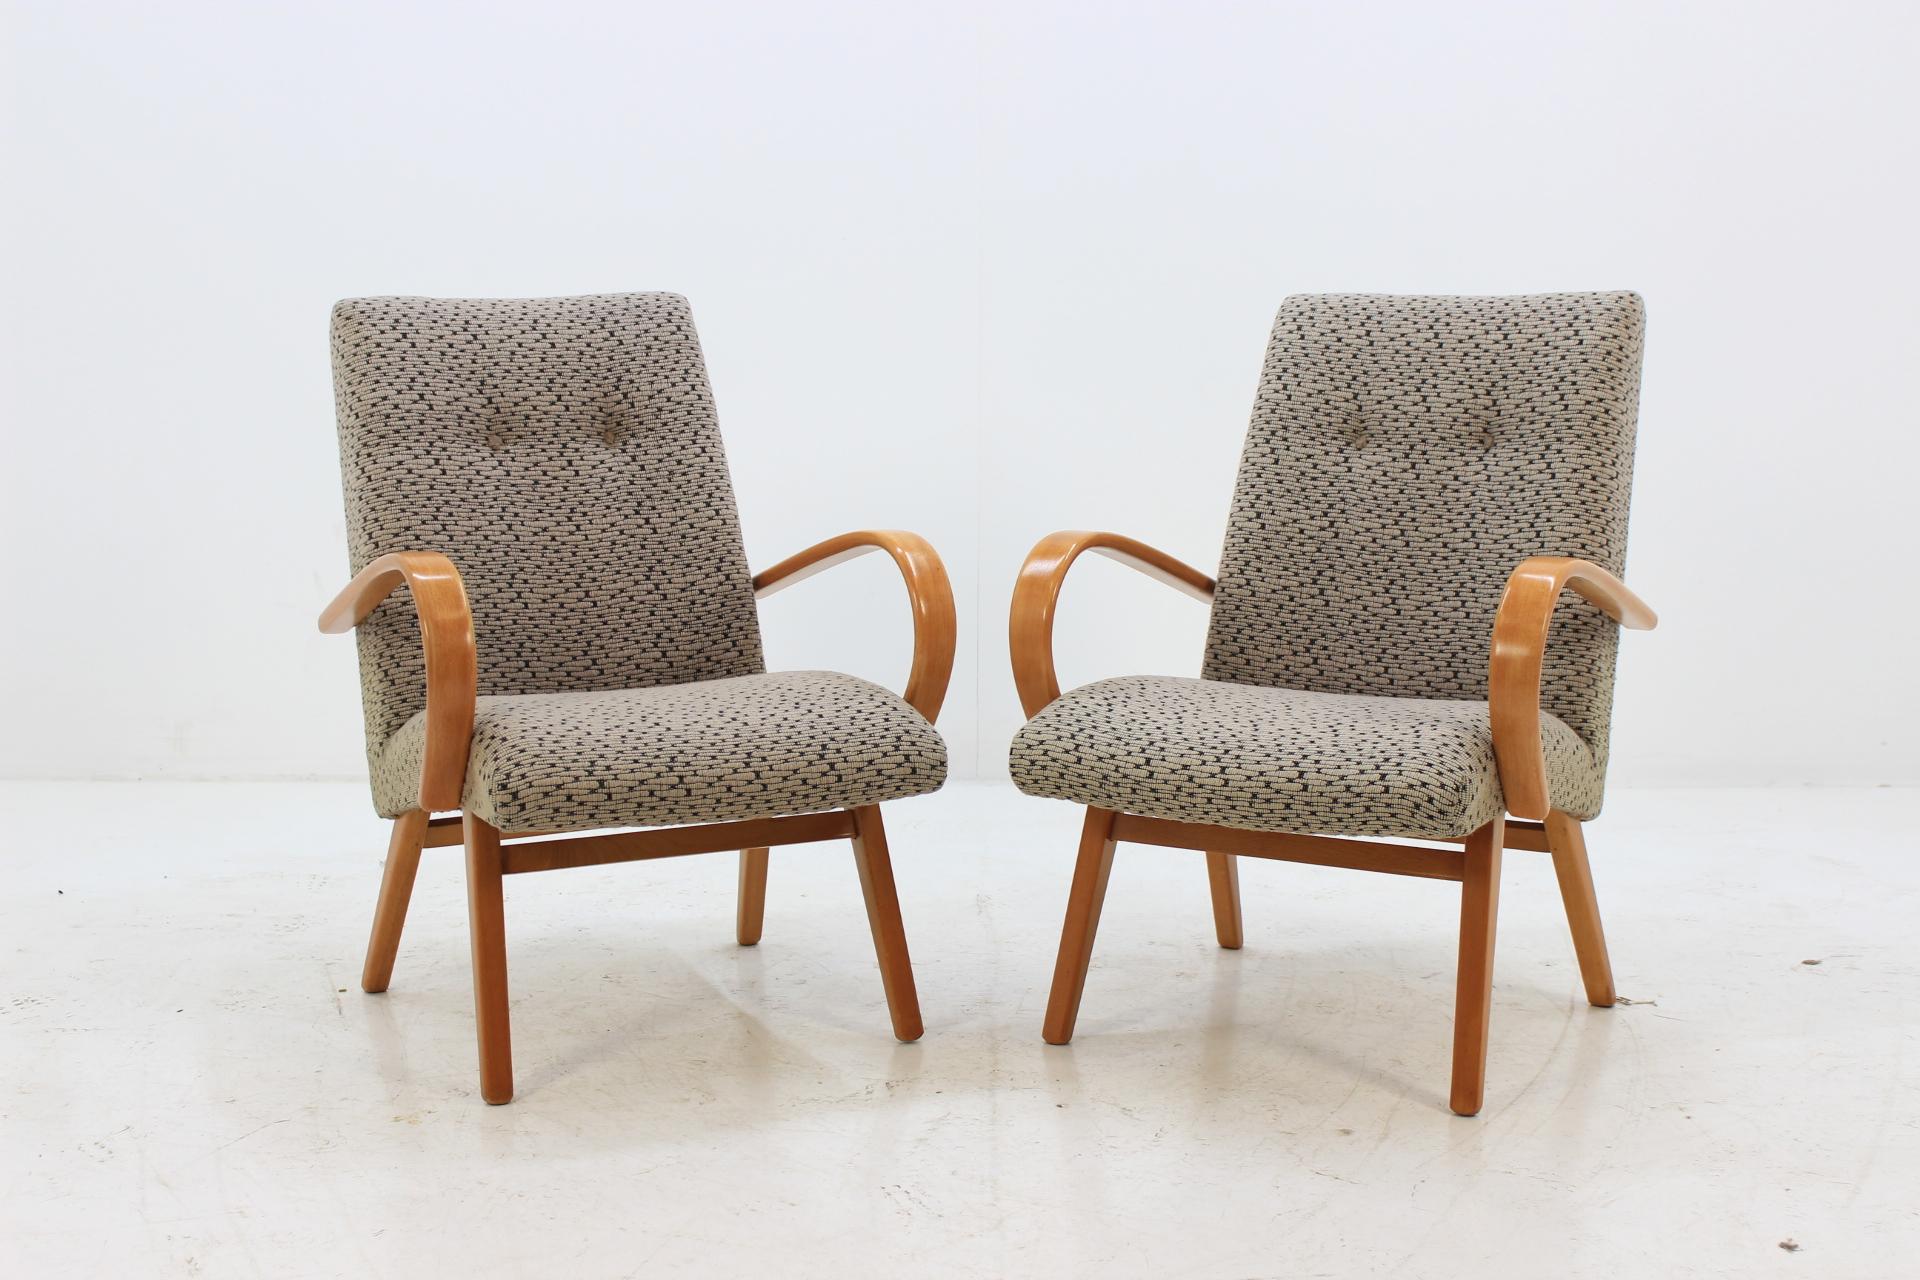 This chair was made in Czech Republic during 1960s by Jitona. Legs and bentwood armrests are made from beech wood. The original fabric upholstery of both chairs is in excellent condition.